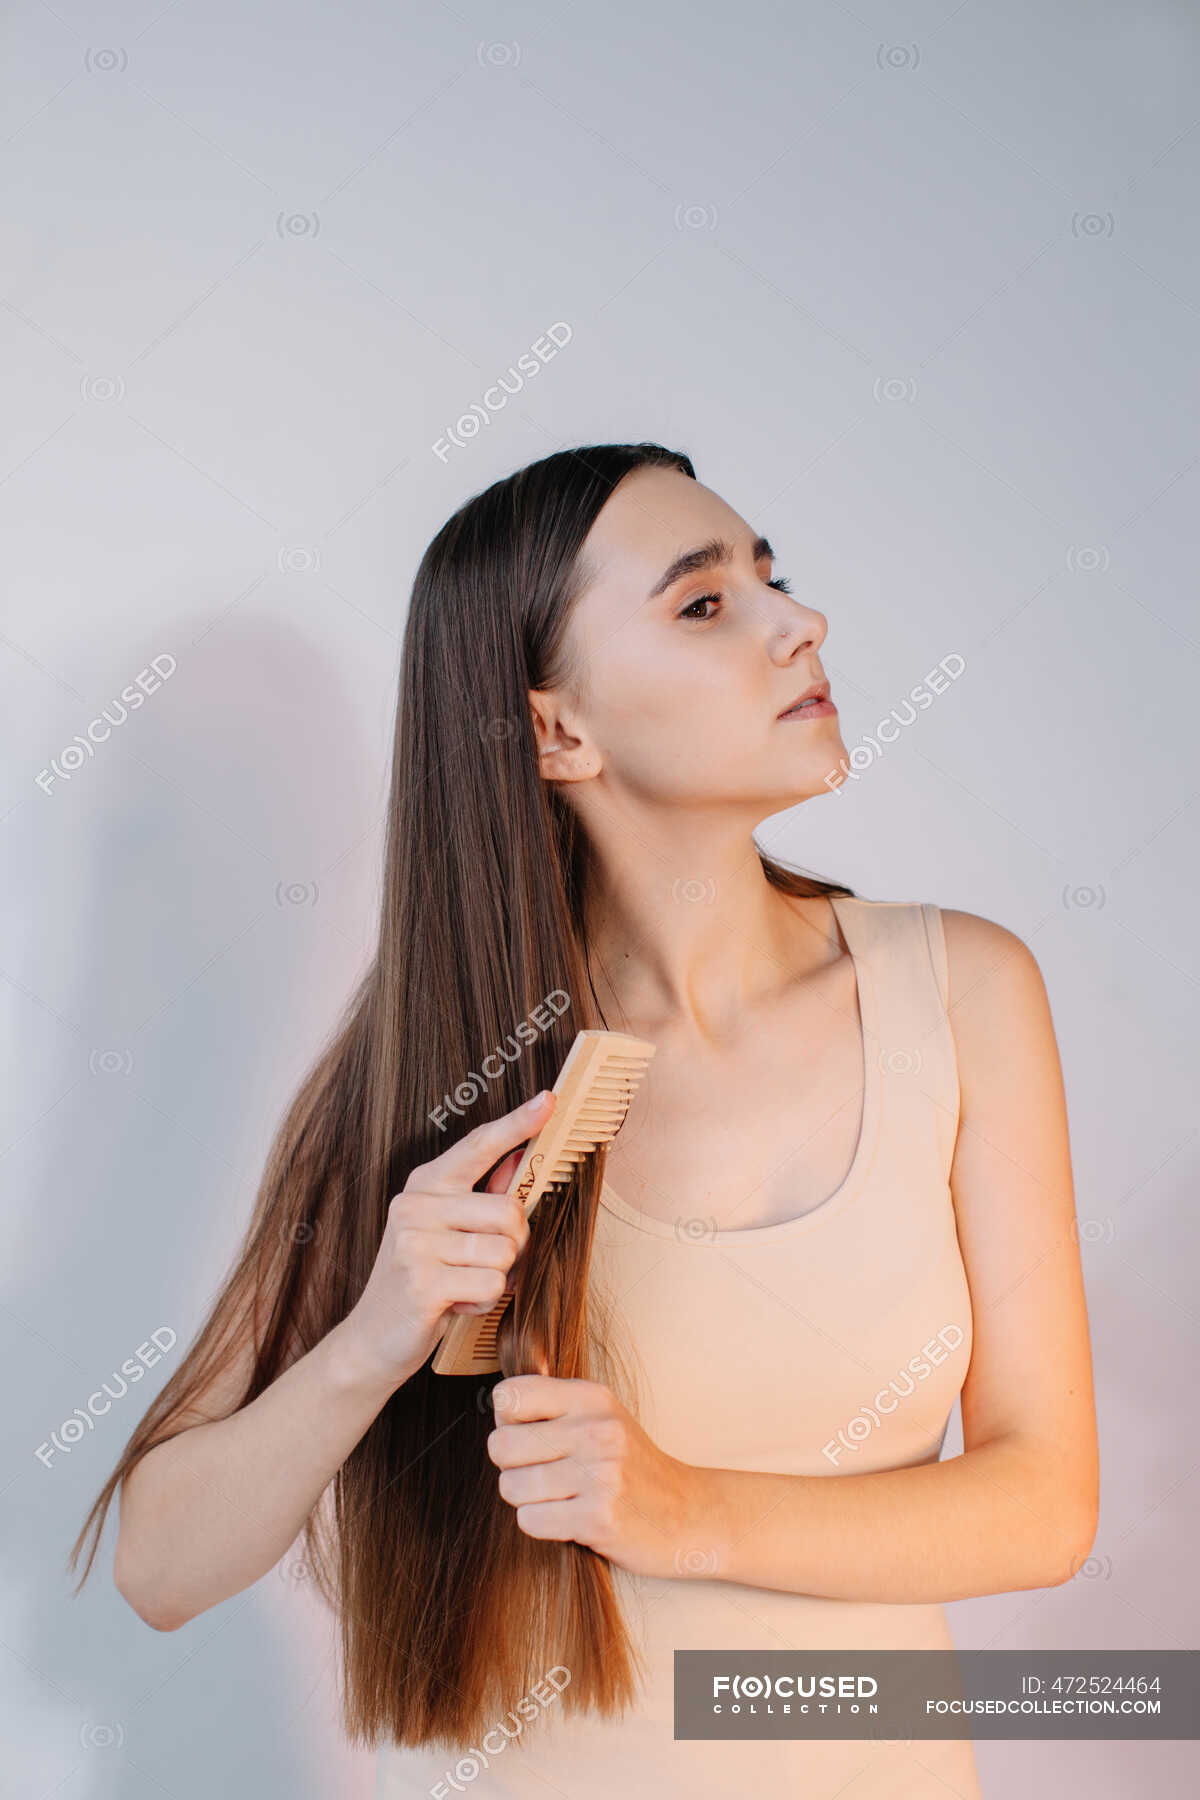 Woman combing her long hair — people, caucasian ethnicity - Stock Photo |  #472524464